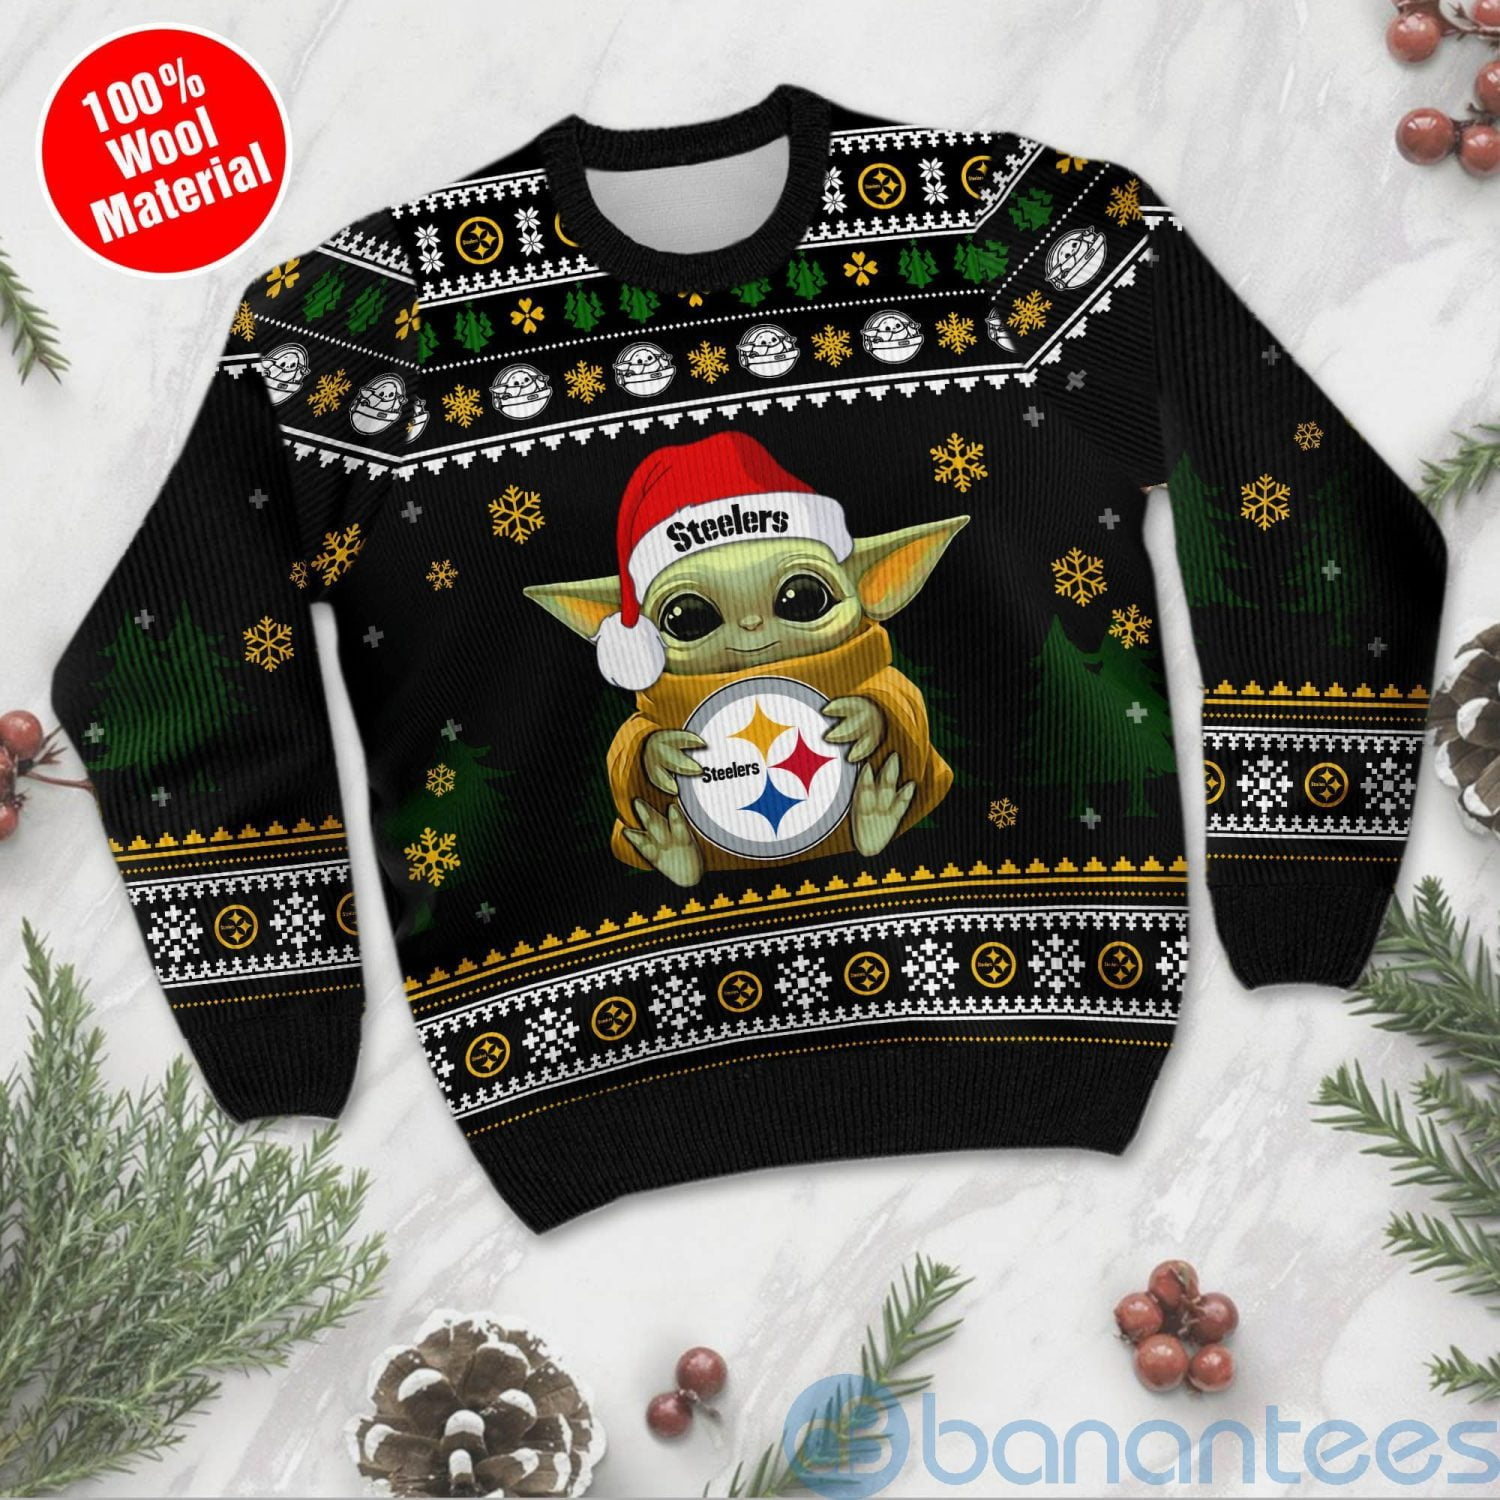 Baby Yoda Love Pittsburgh Steelers Sweater | The Best Christmas Gift